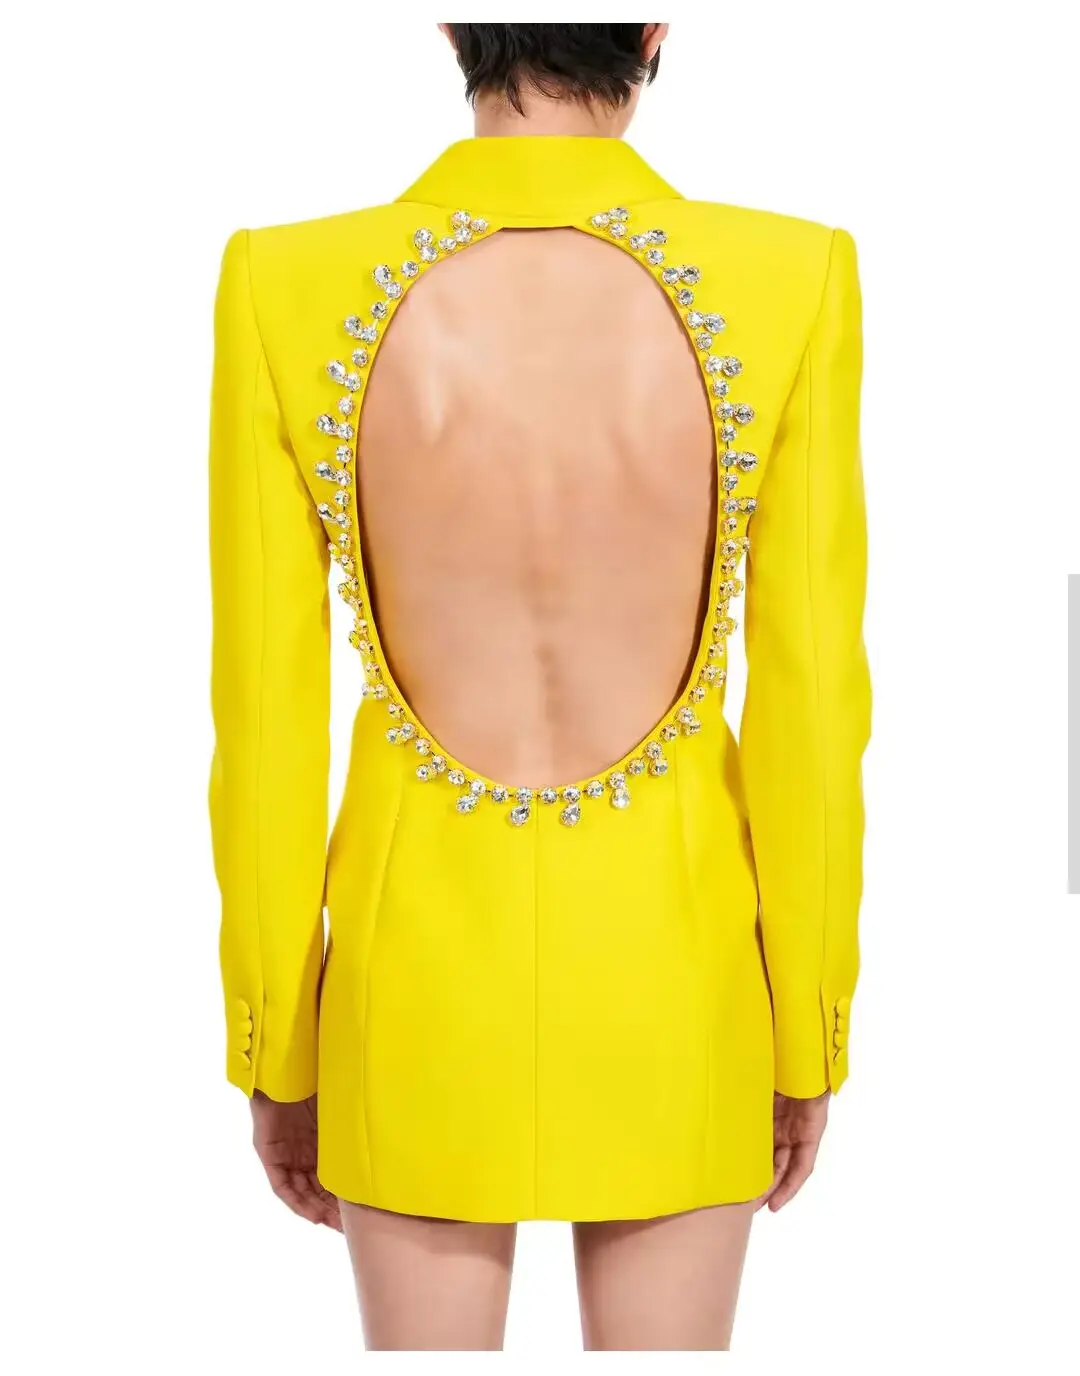 A7505 In Stock Items Yellow Ladies Jackets Plus Size Backless Beaded Women Blazer And Coat